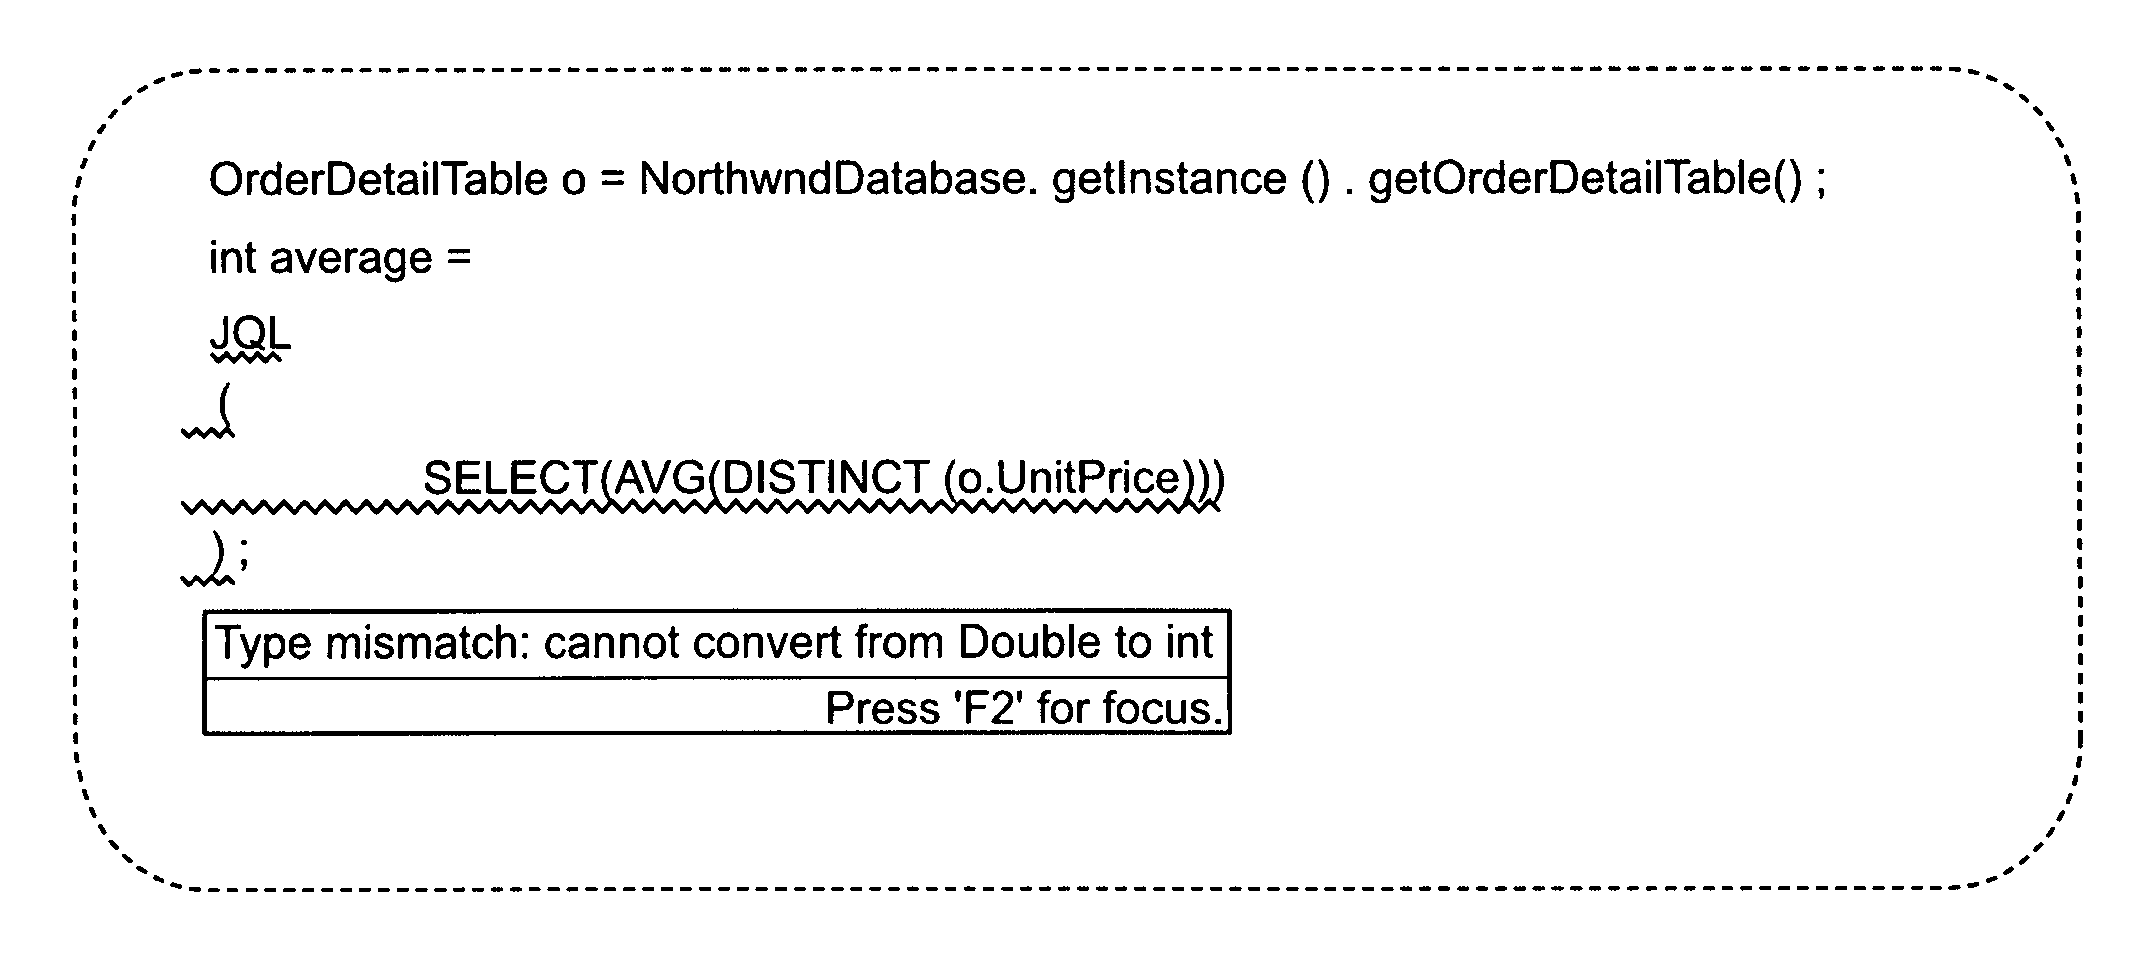 Processing an object-oriented query to retrieve data from a data source